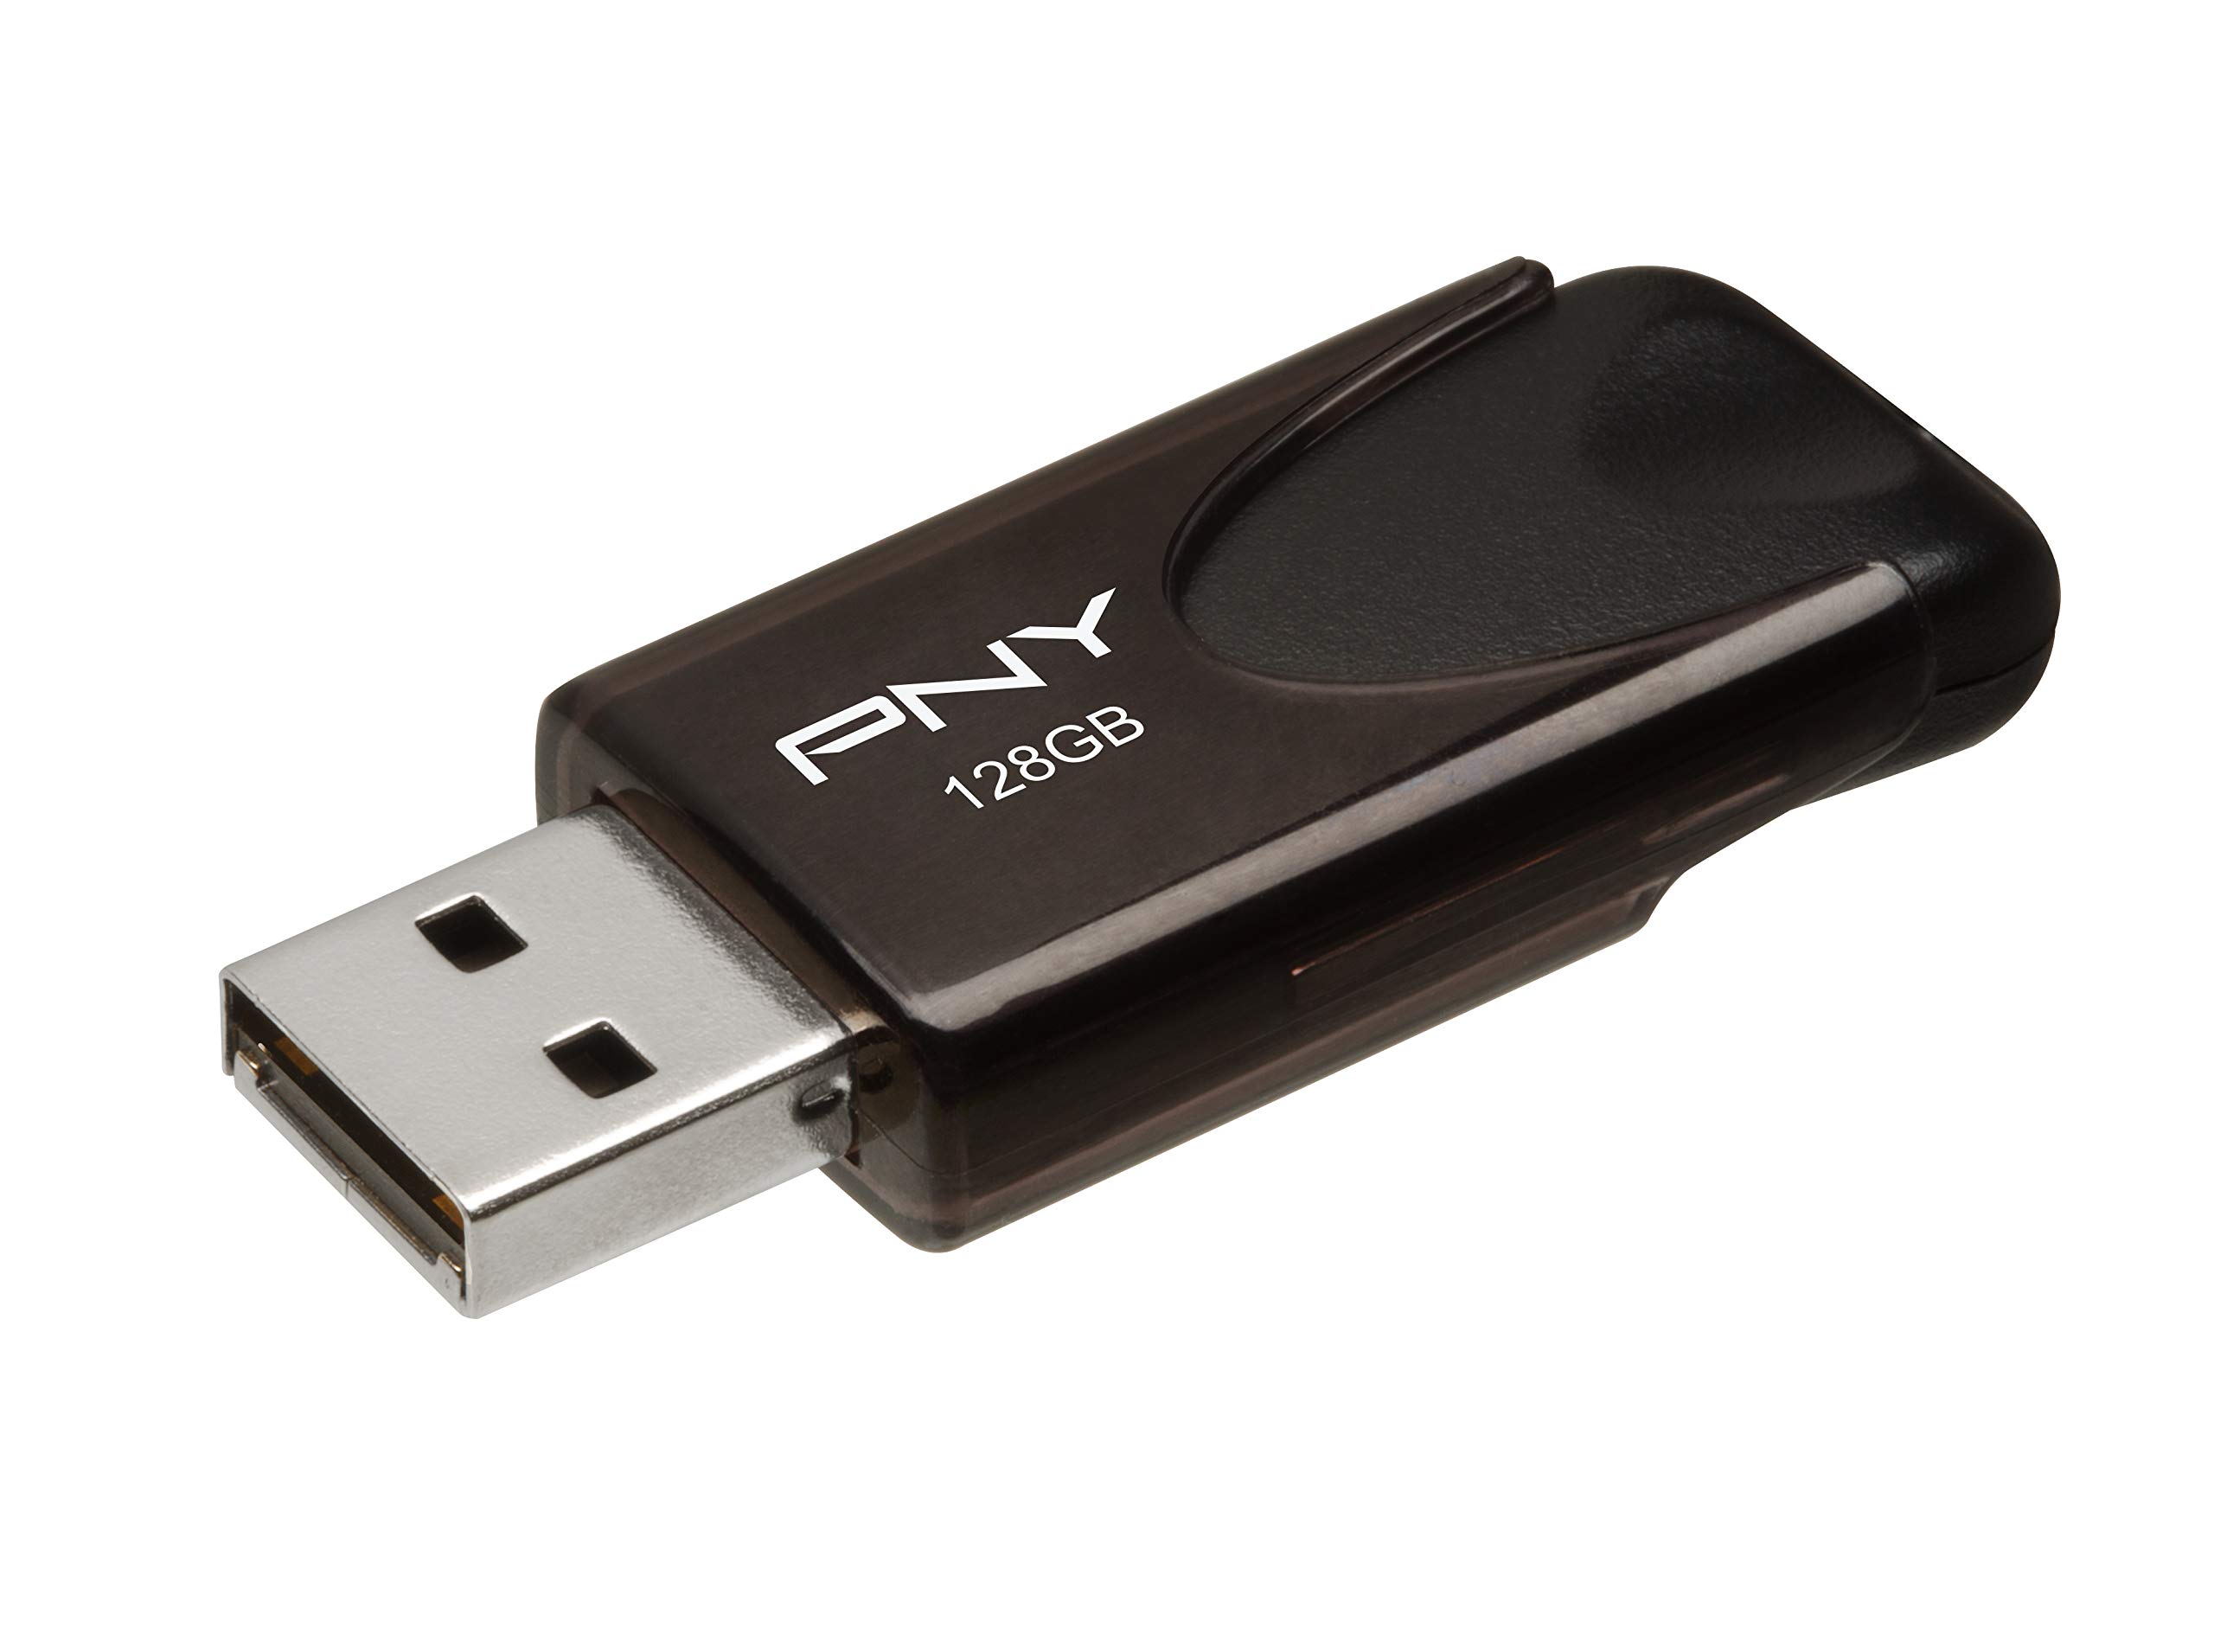 PNY 128GB Attaché 4 USB 2.0 Flash Drive (Black) for $7.99 + Free Shipping w/ Prime or on $25+